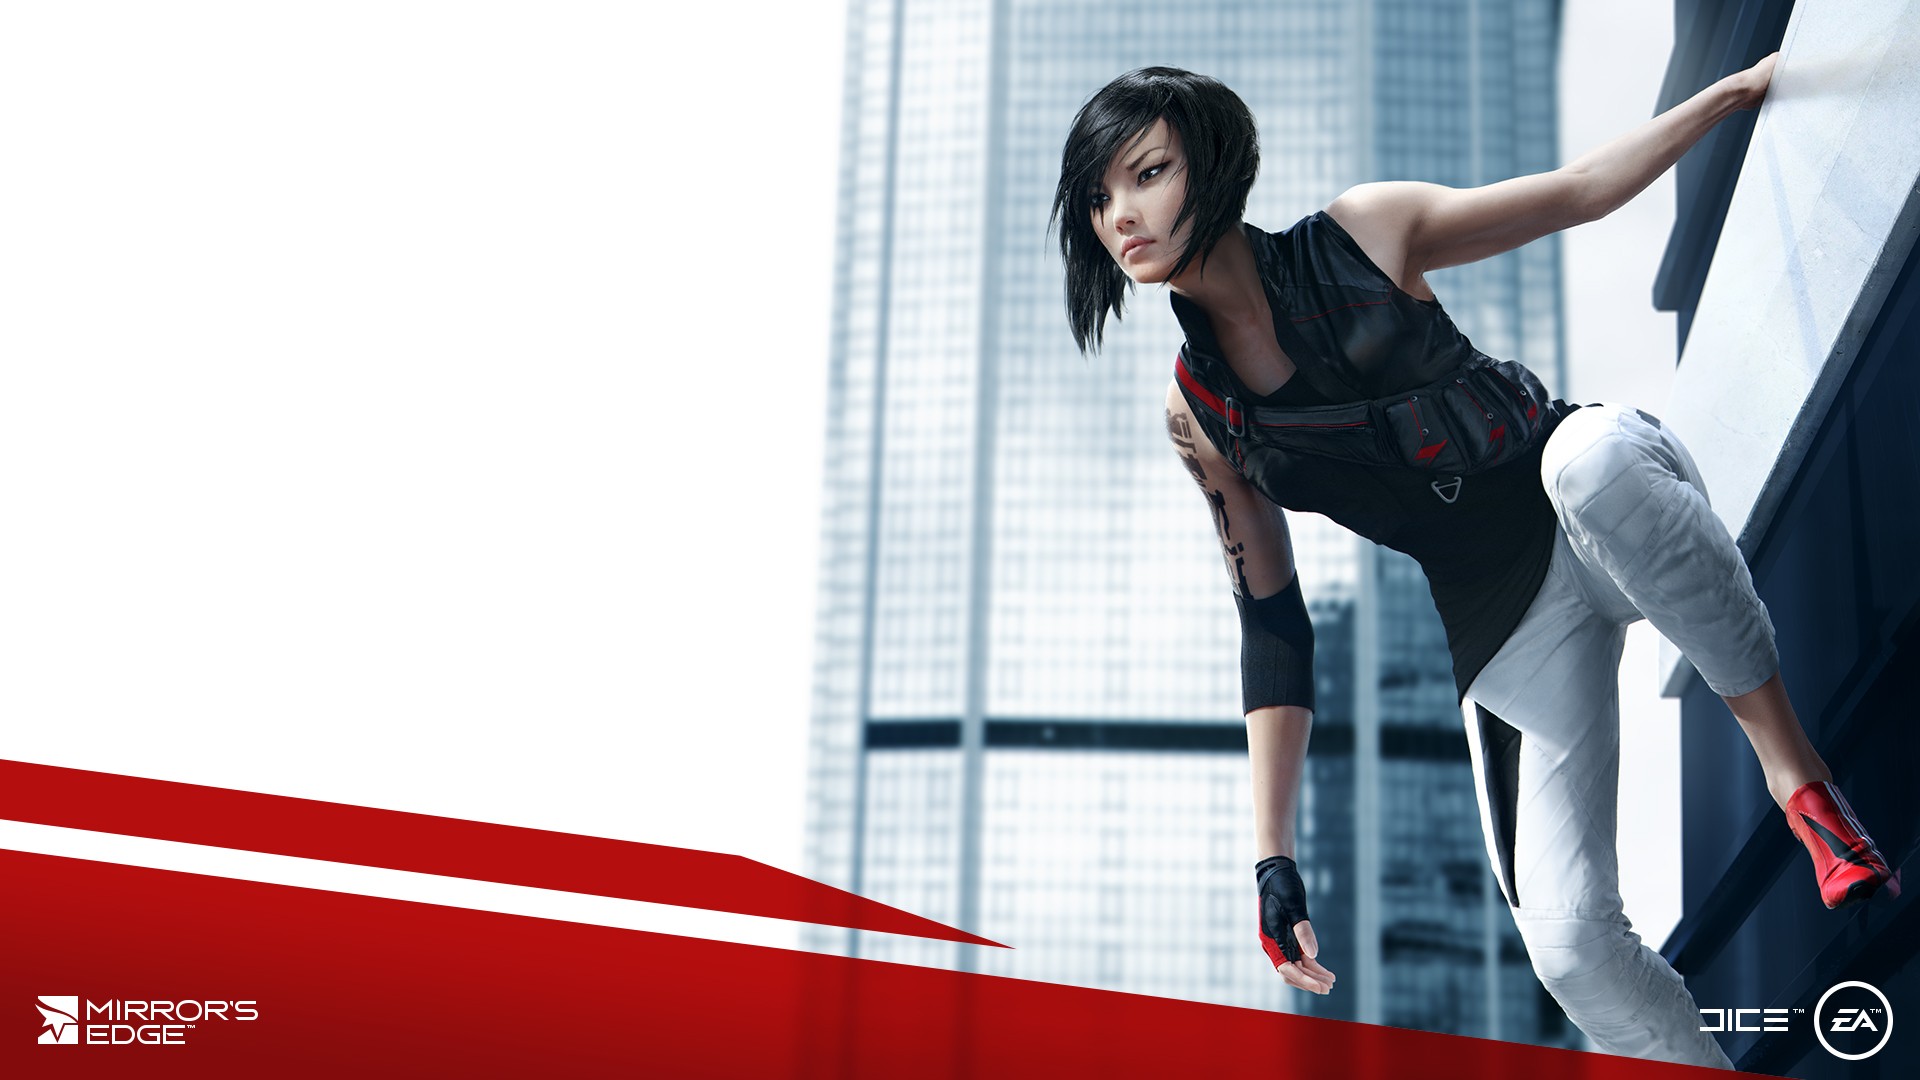 Mirrors Edge Video Games Dice Electronic Arts Digital Art 2008 Year Faith Connors 1920x1080